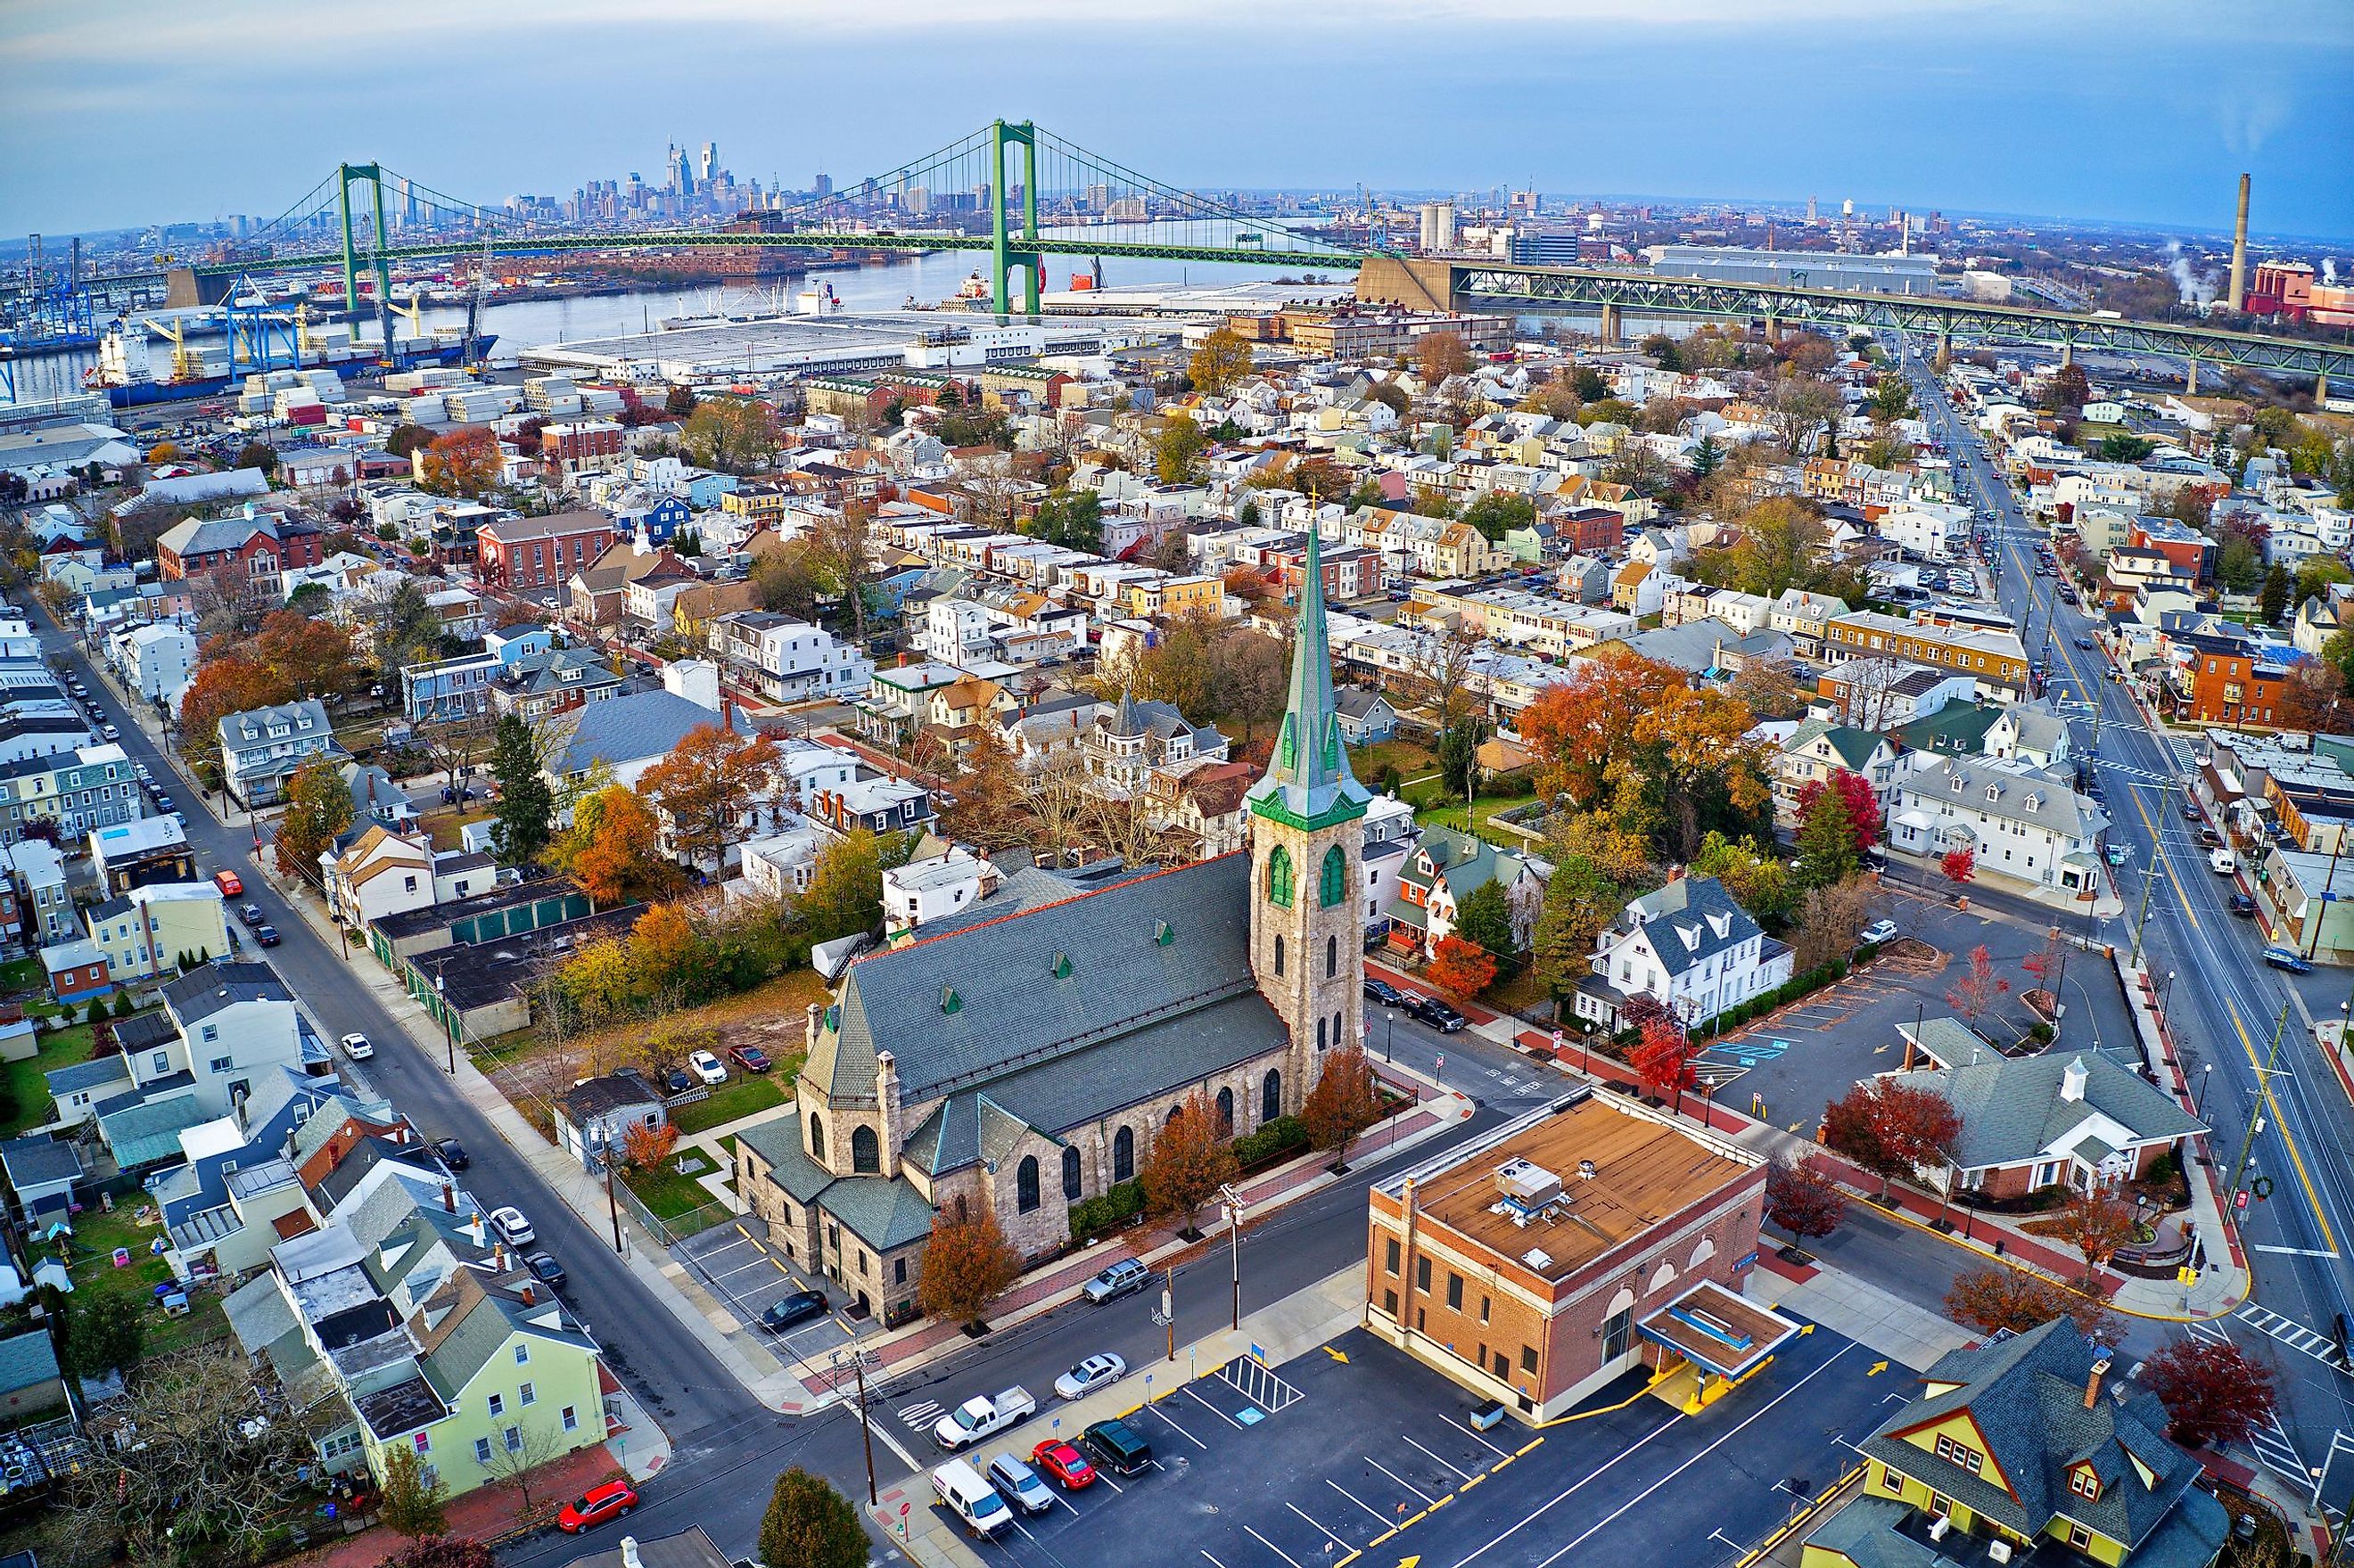 Aerial view of Gloucester, New Jersey.